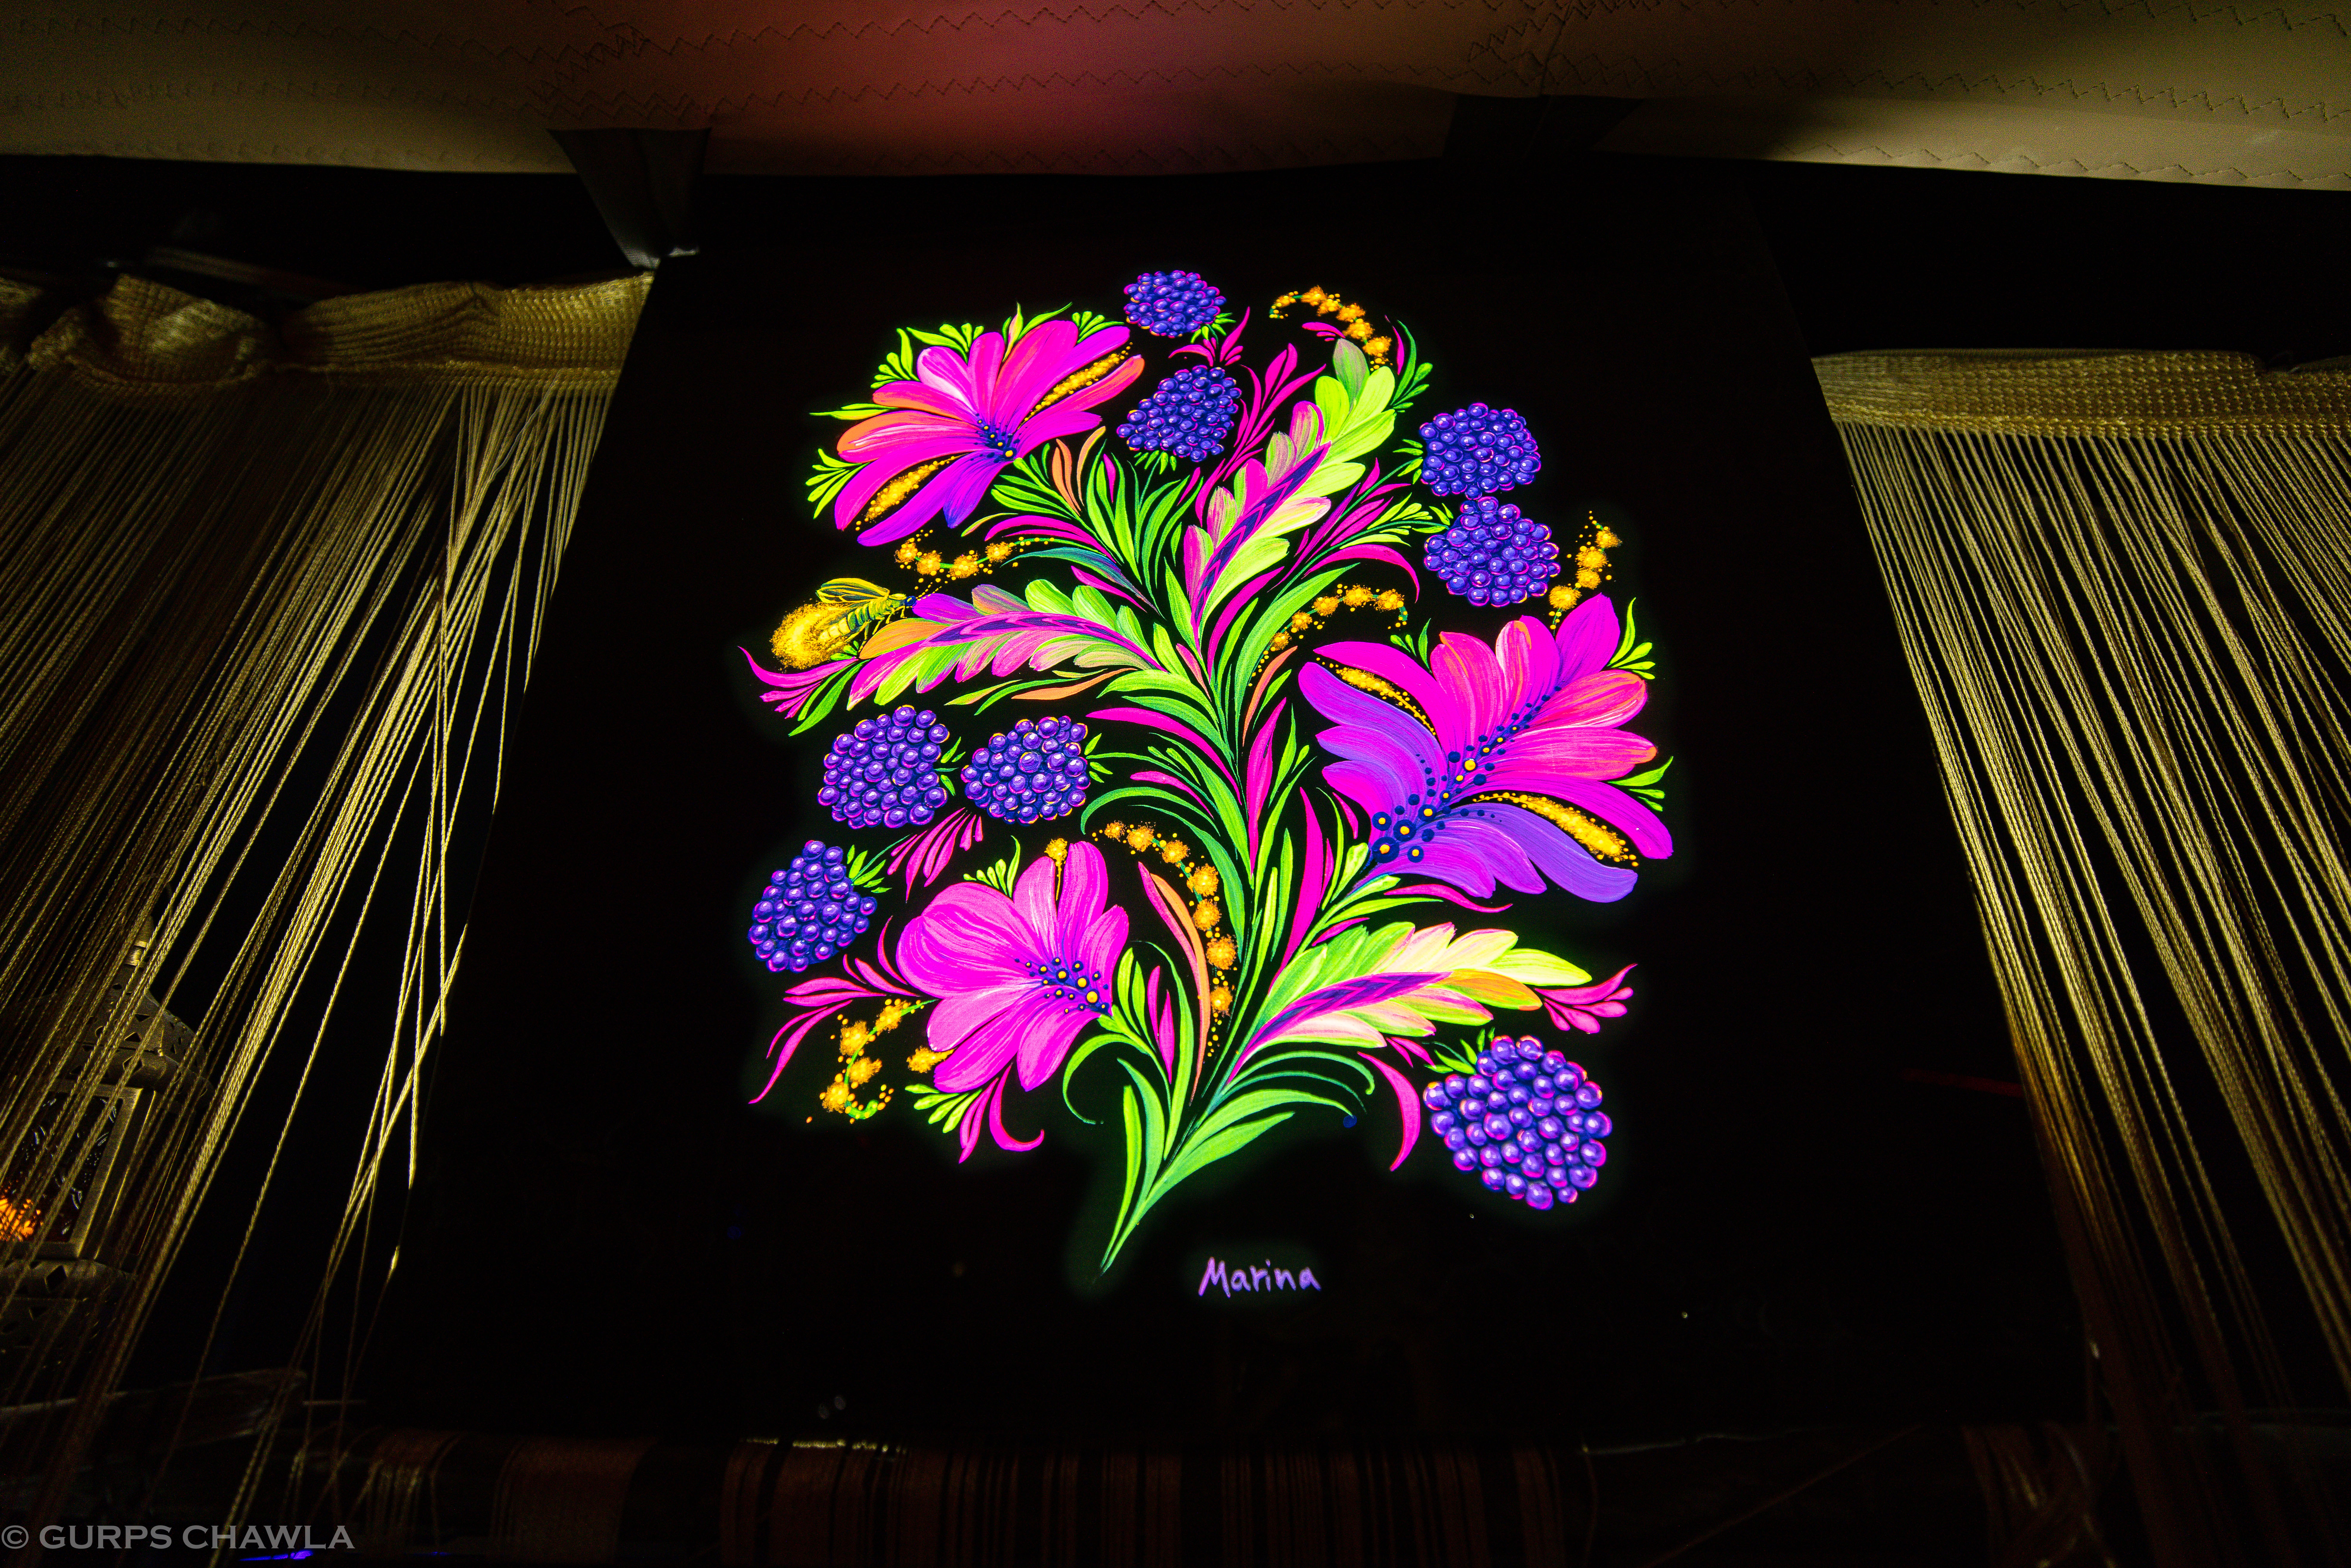 Unique Light Painting by Marina Malyarenko - A Fusion of Art, Light, and Compassion